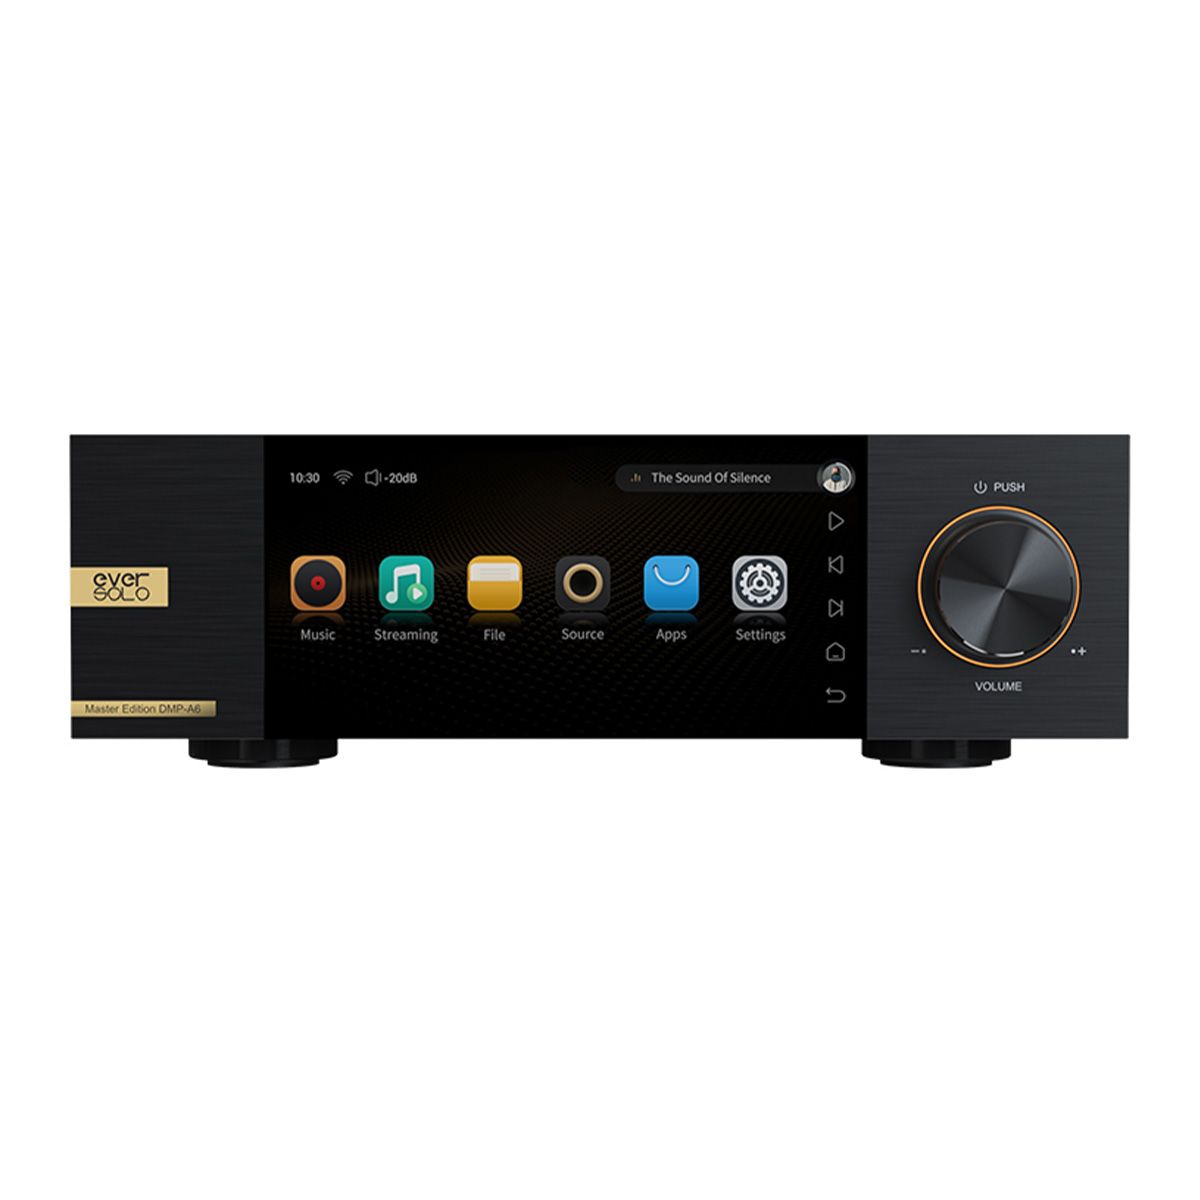 EverSolo DMP-A6 MASTER EDITION Network Streamer & DAC front view